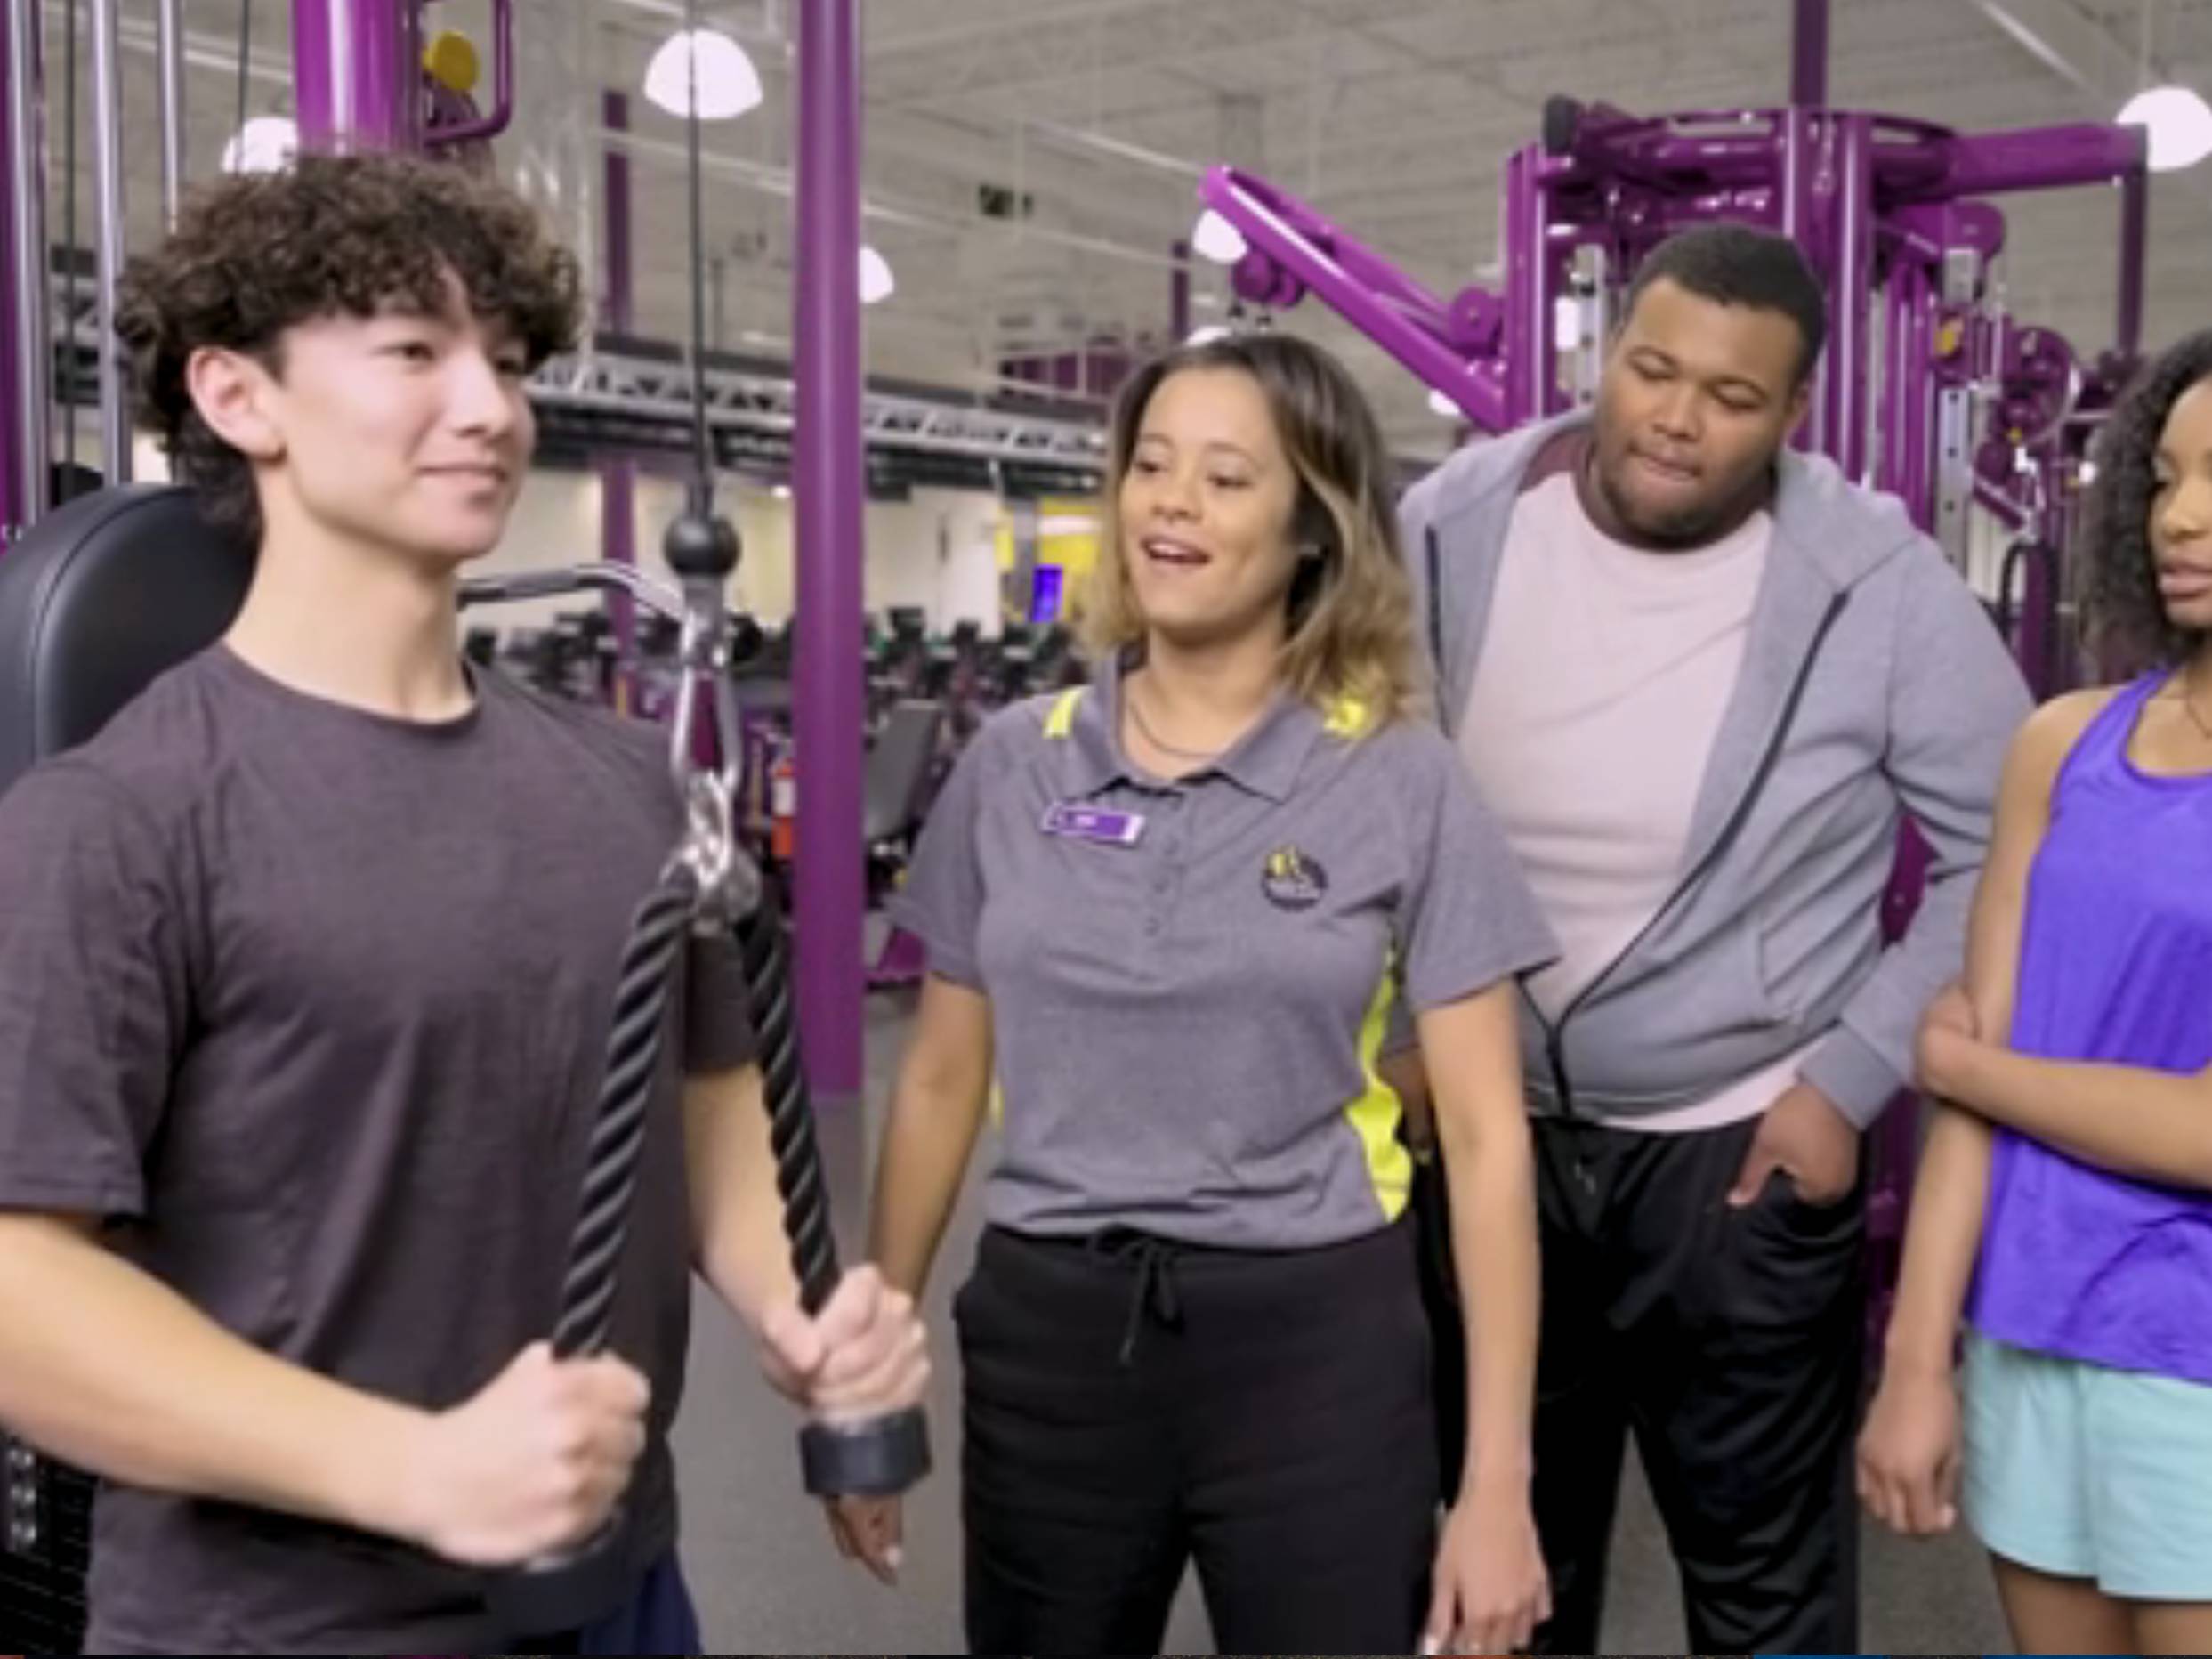 PLANET FITNESS INVITES TEENS TO WORK OUT FOR FREE ALL SUMMER LONG FROM MAY 15 - AUGUST 31